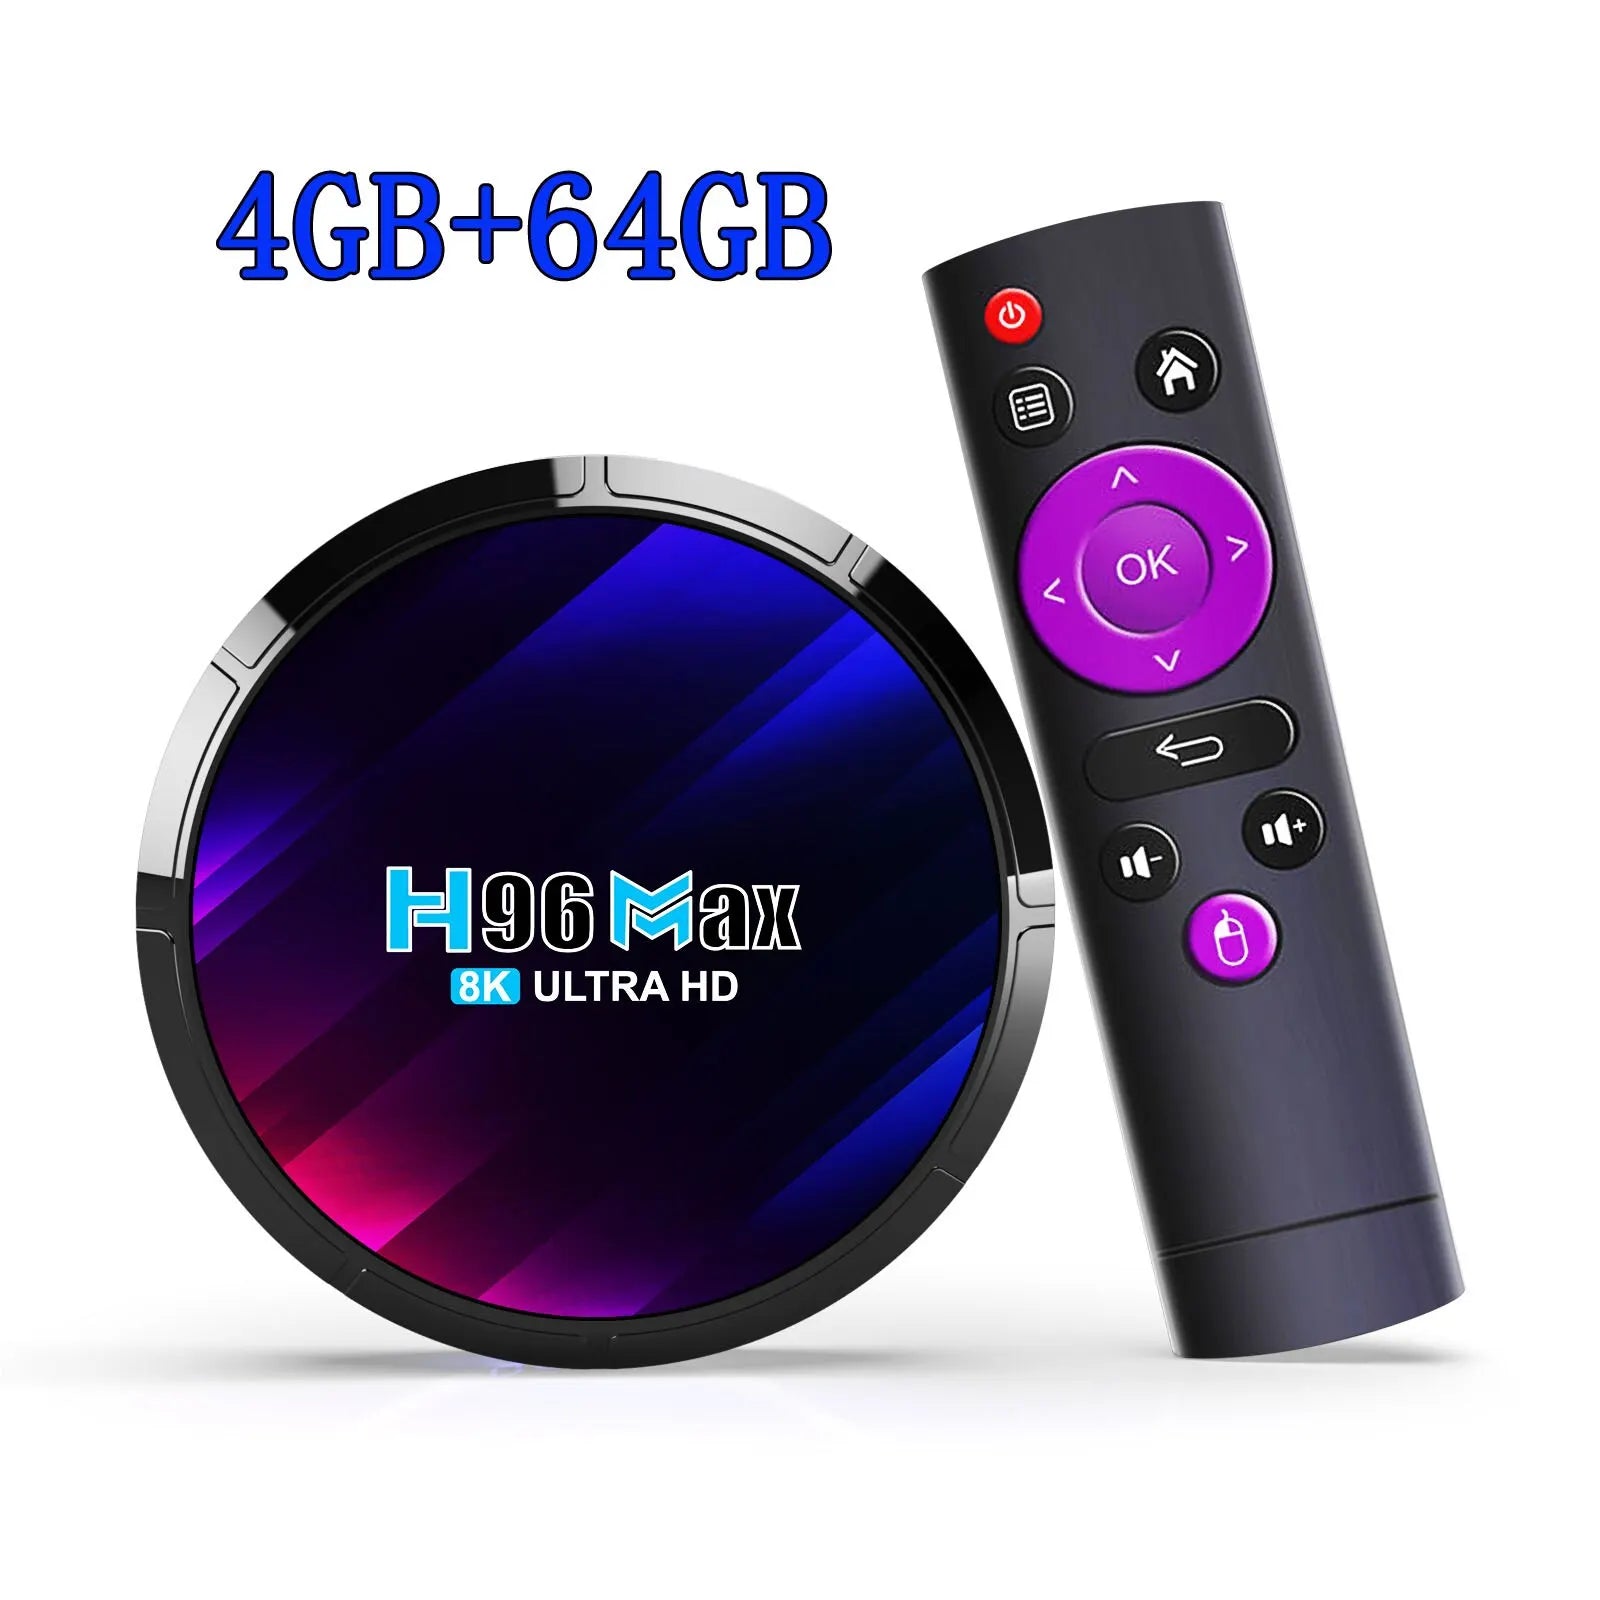 Android TV Box H96MAX RK3528 Android Box Support 2.4G/5.8G WiFi6 BT5.0 4K Video Set Top TV Box Decode And Play 8K 24Fps - Magcubic Projectors Official Store magcubicvision.com